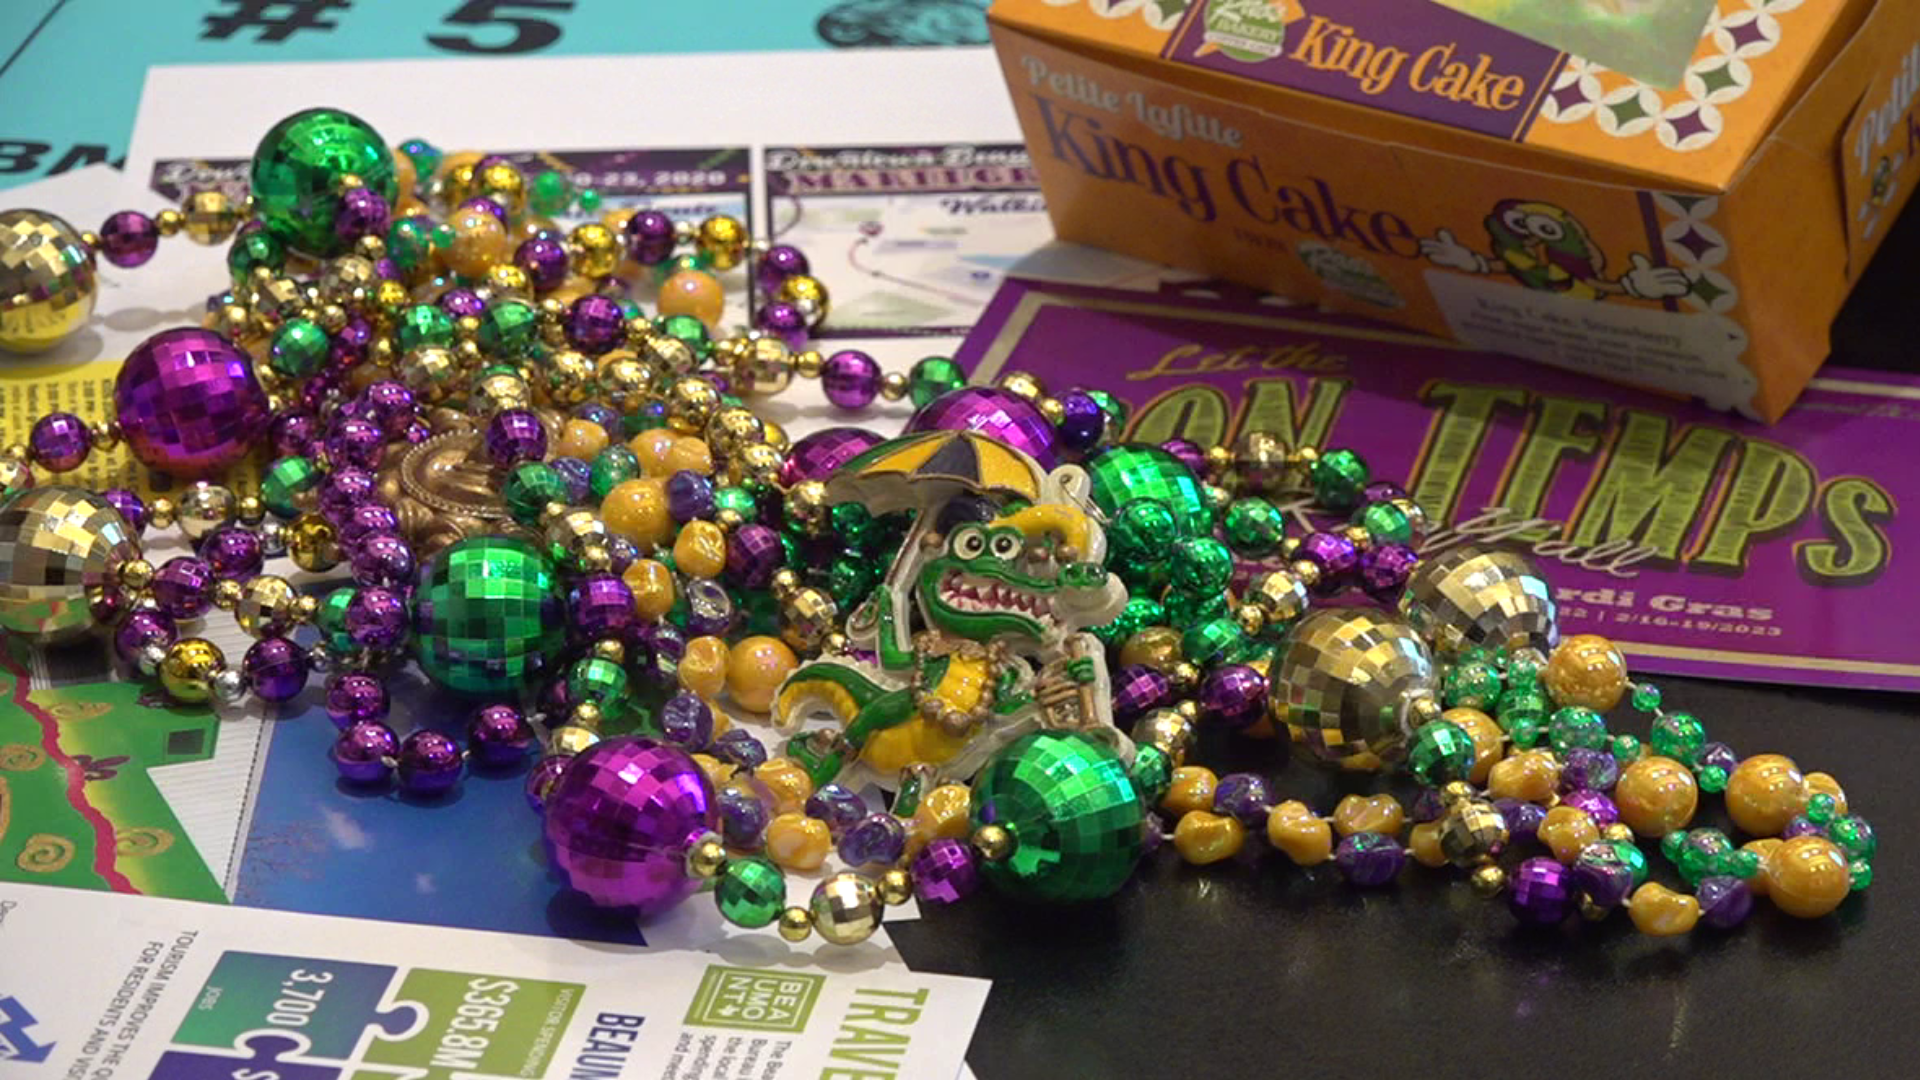 Beaumont Police say they're ready for Mardi Gras, with an average of 30 officers on duty for each night